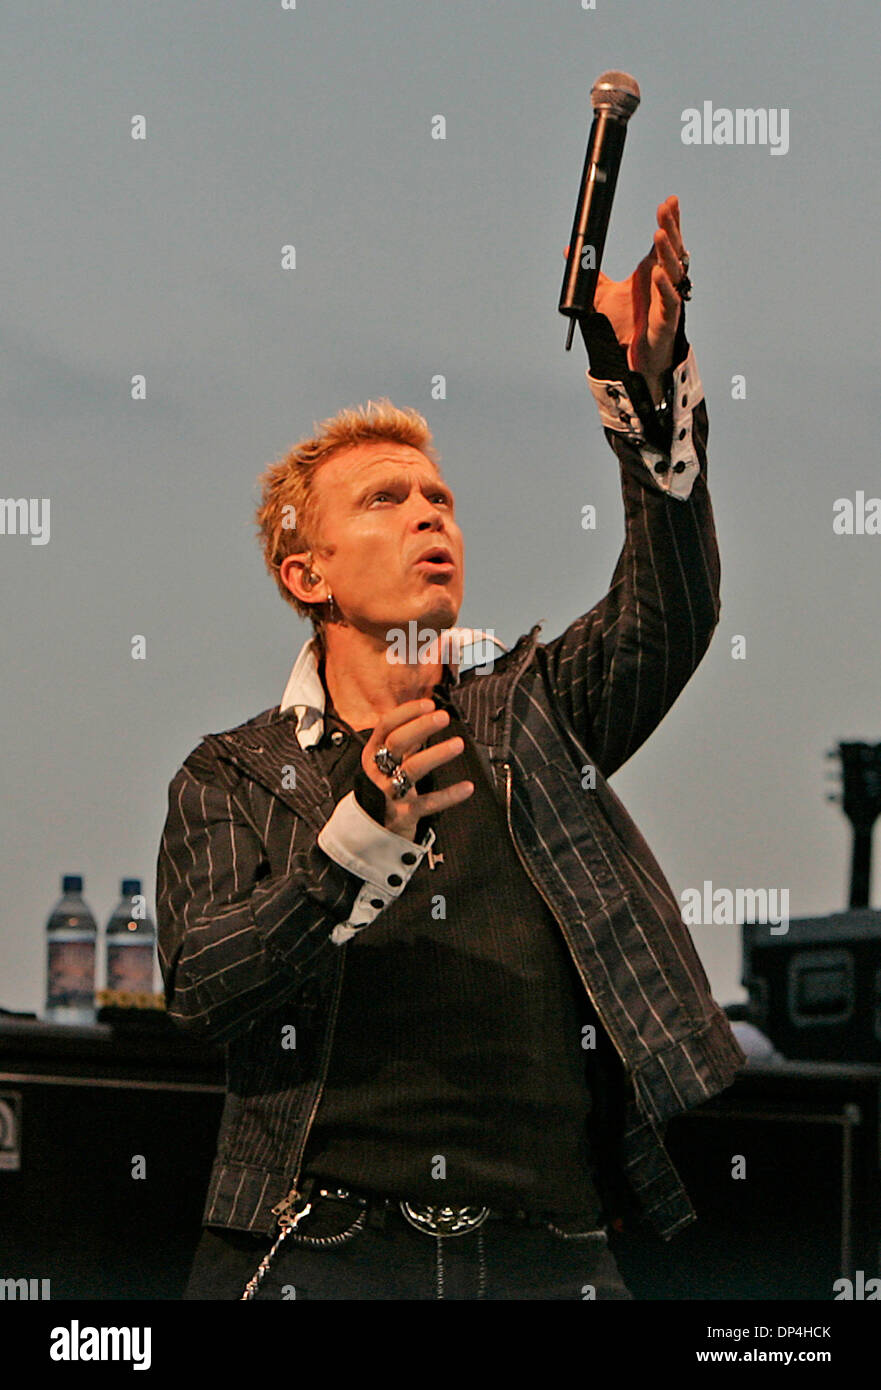 Aug 12, 2006; Los Angeles, CA, USA; BILLY IDOL performing to thousands of his loyal fans at the Del Mar Racetrack in San Diego, CA. Mandatory Credit: Photo by John Hardick/ZUMA Press. (©) Copyright 2006 by John Hardick Stock Photo